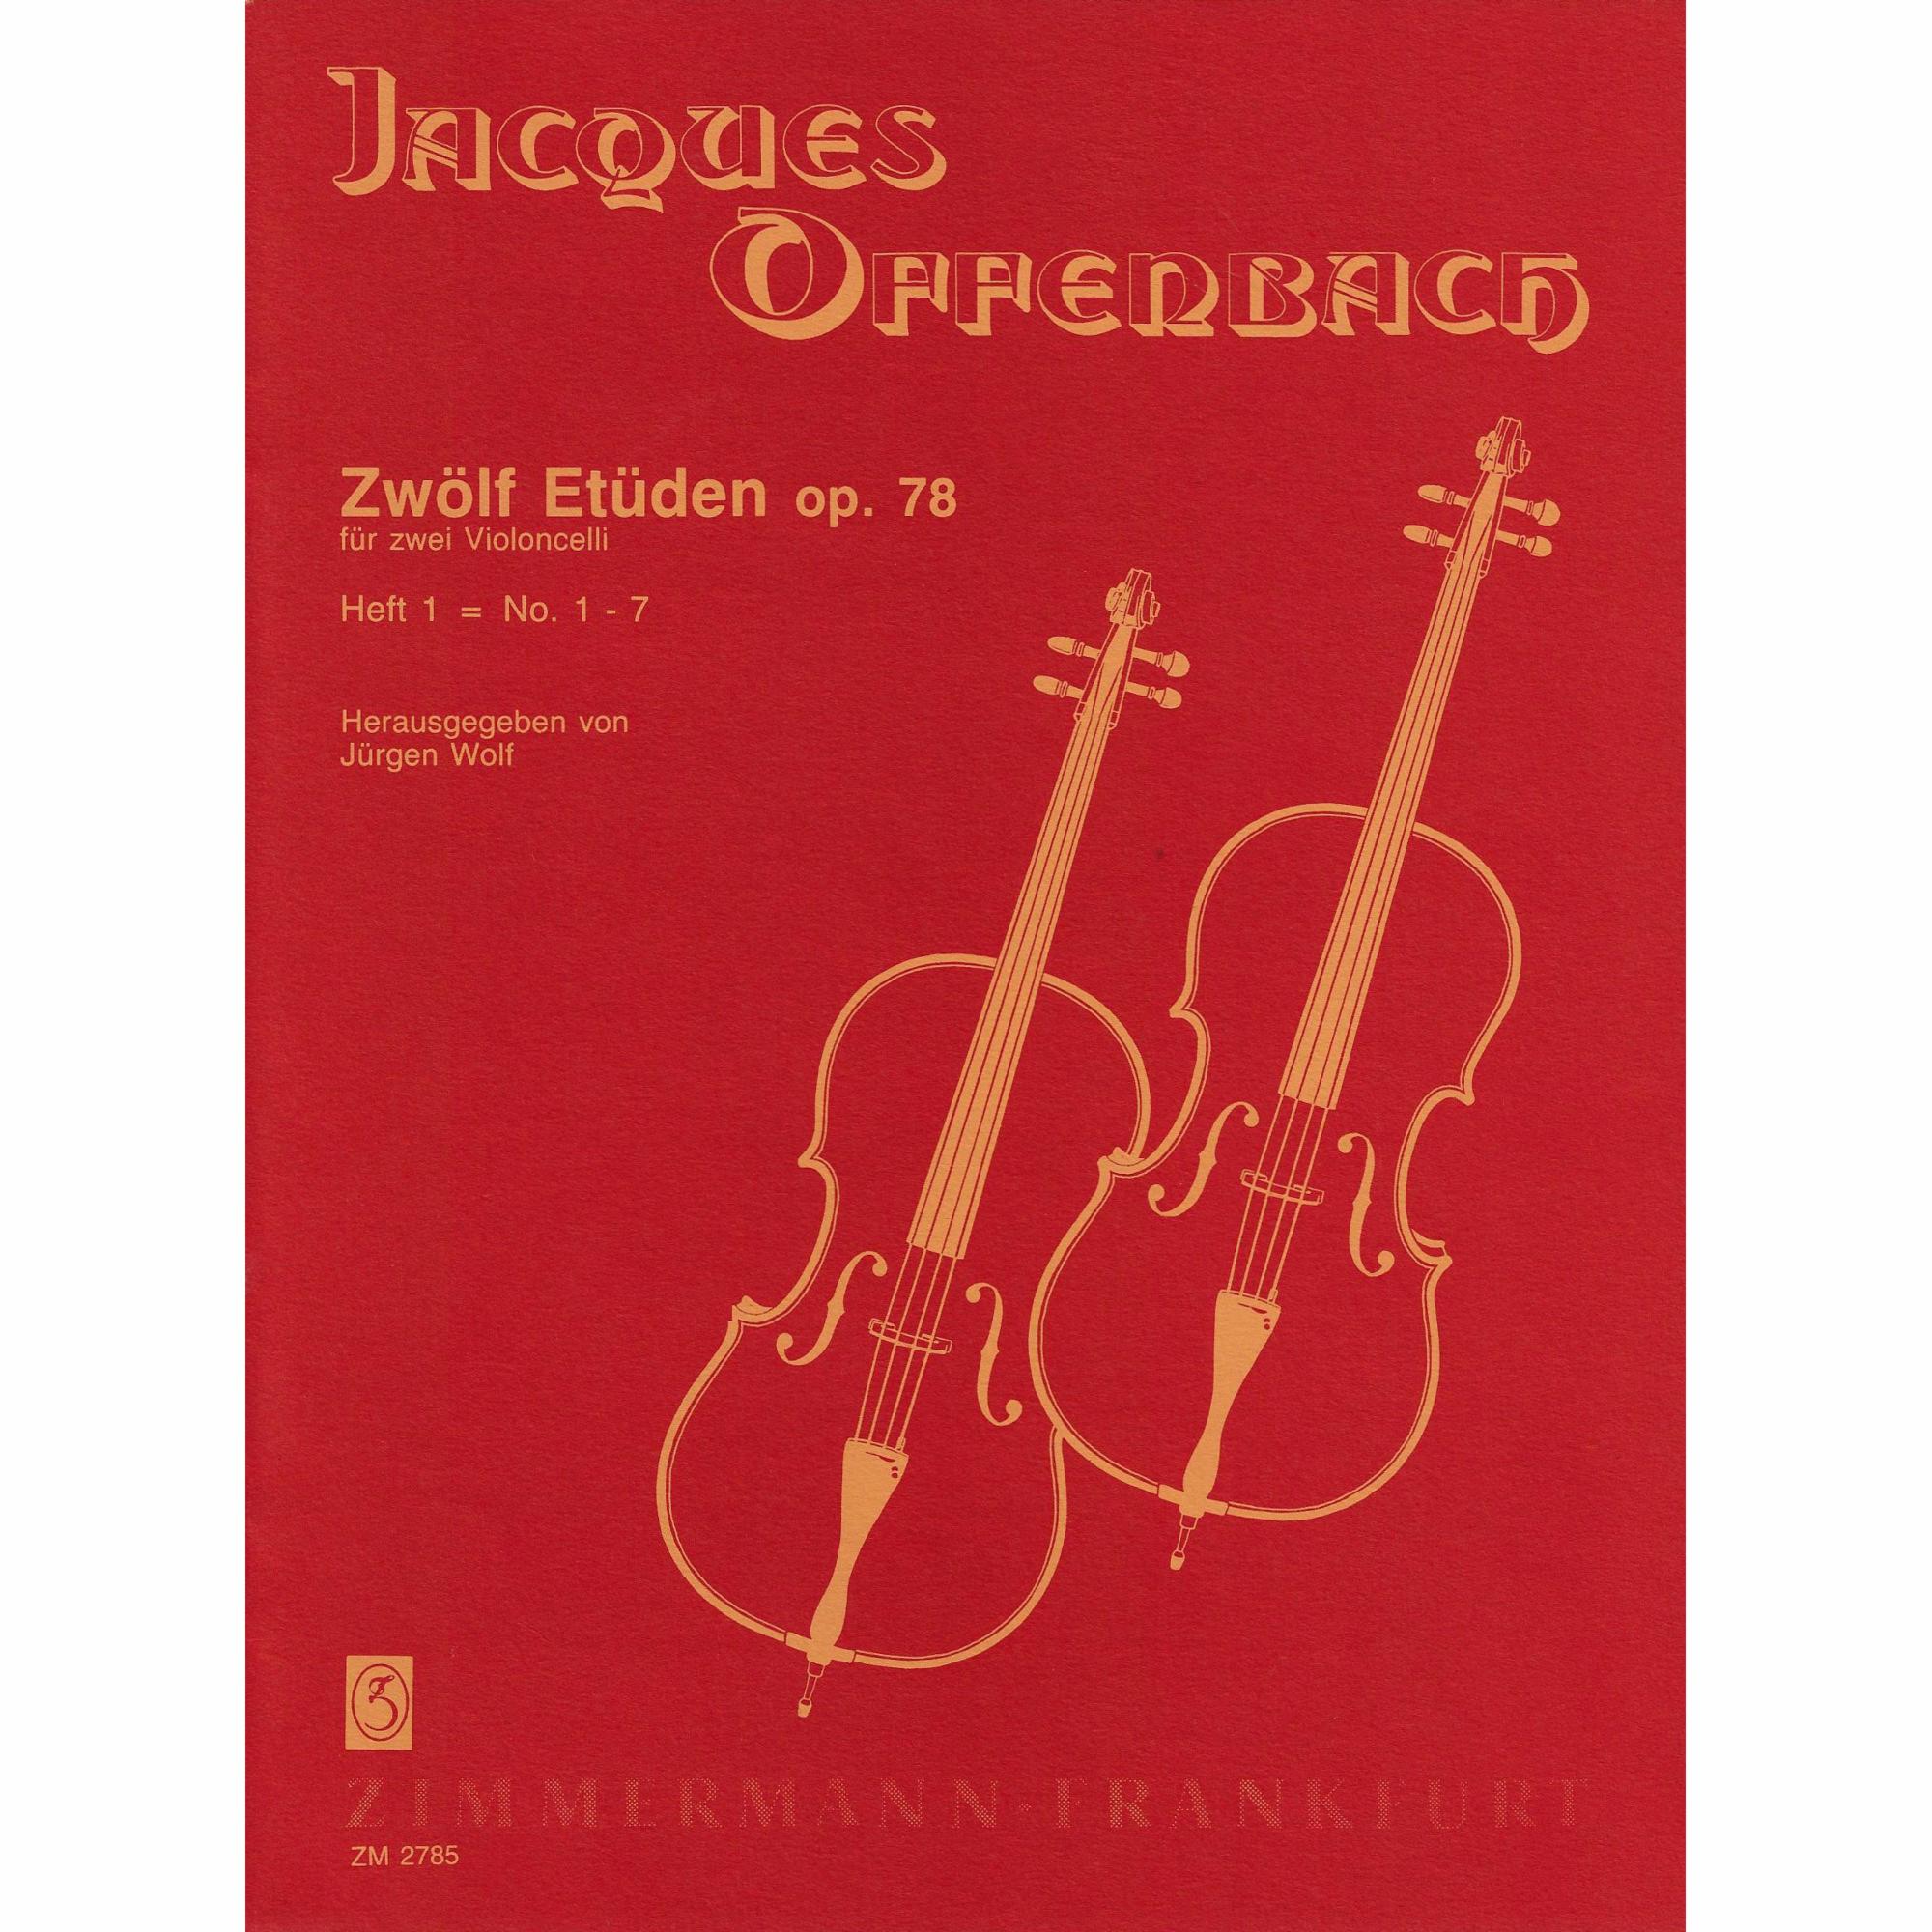 Offenbach -- 12 Etudes, Op. 78, Vols. 1-2 for Two Cellos